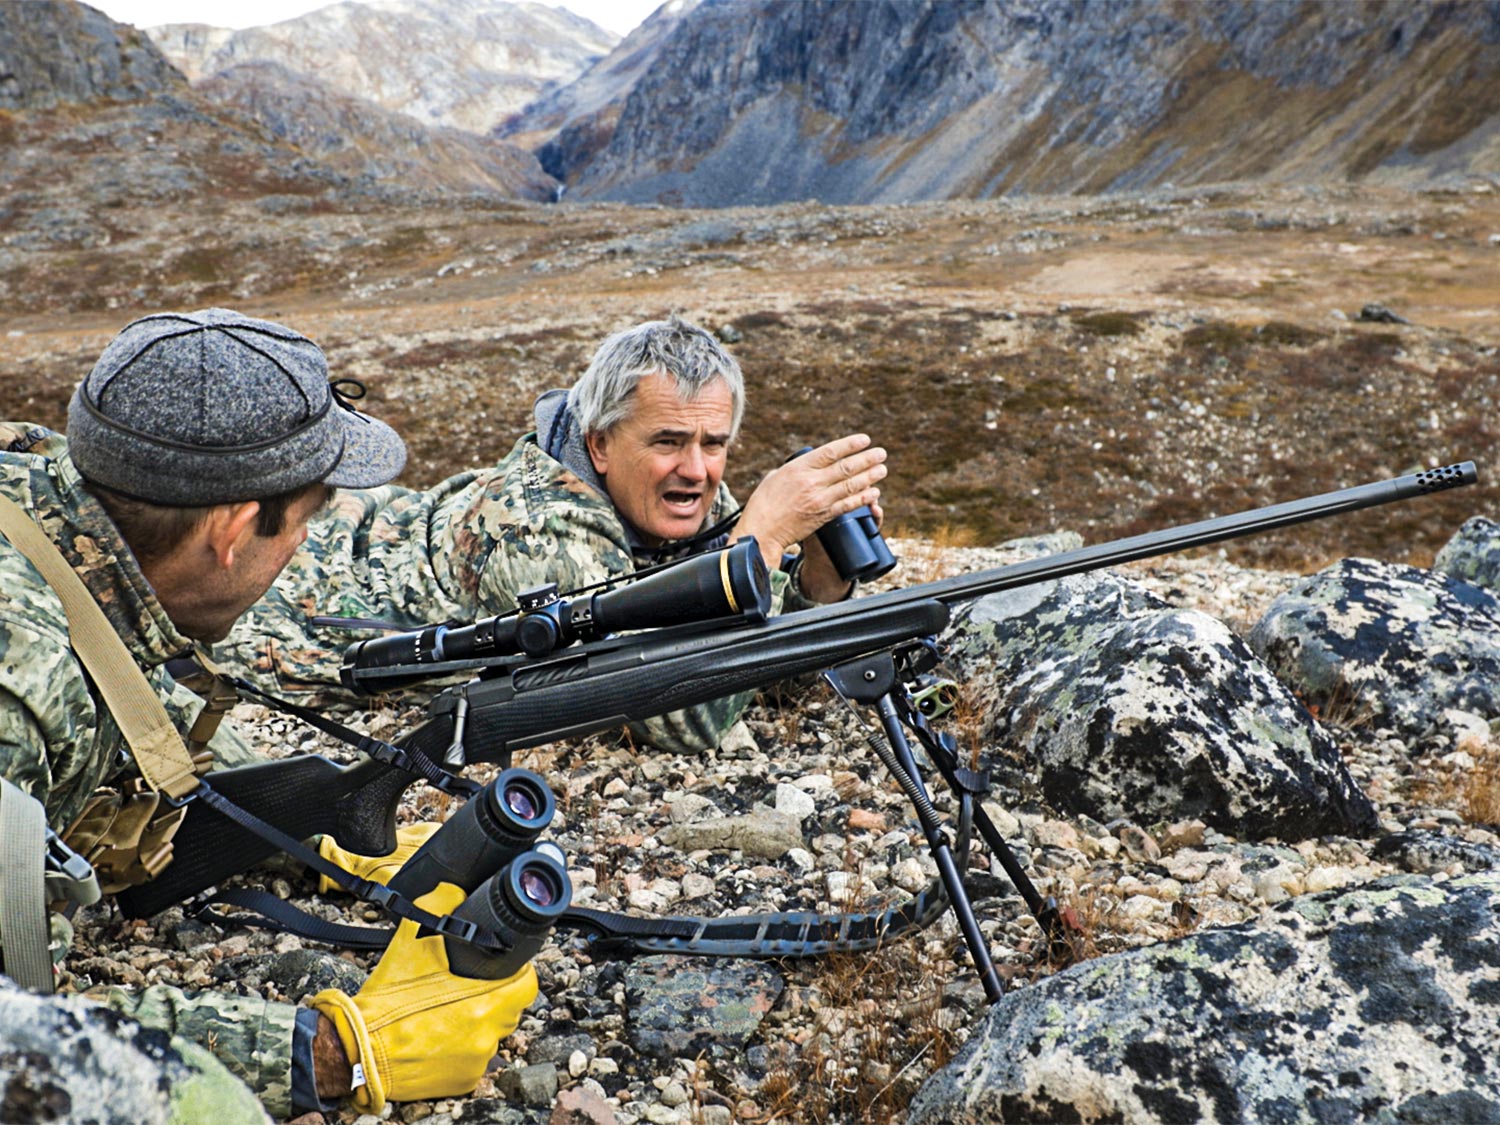 Frank Feldmann and the author set up for a long shot at grazing musk ox.